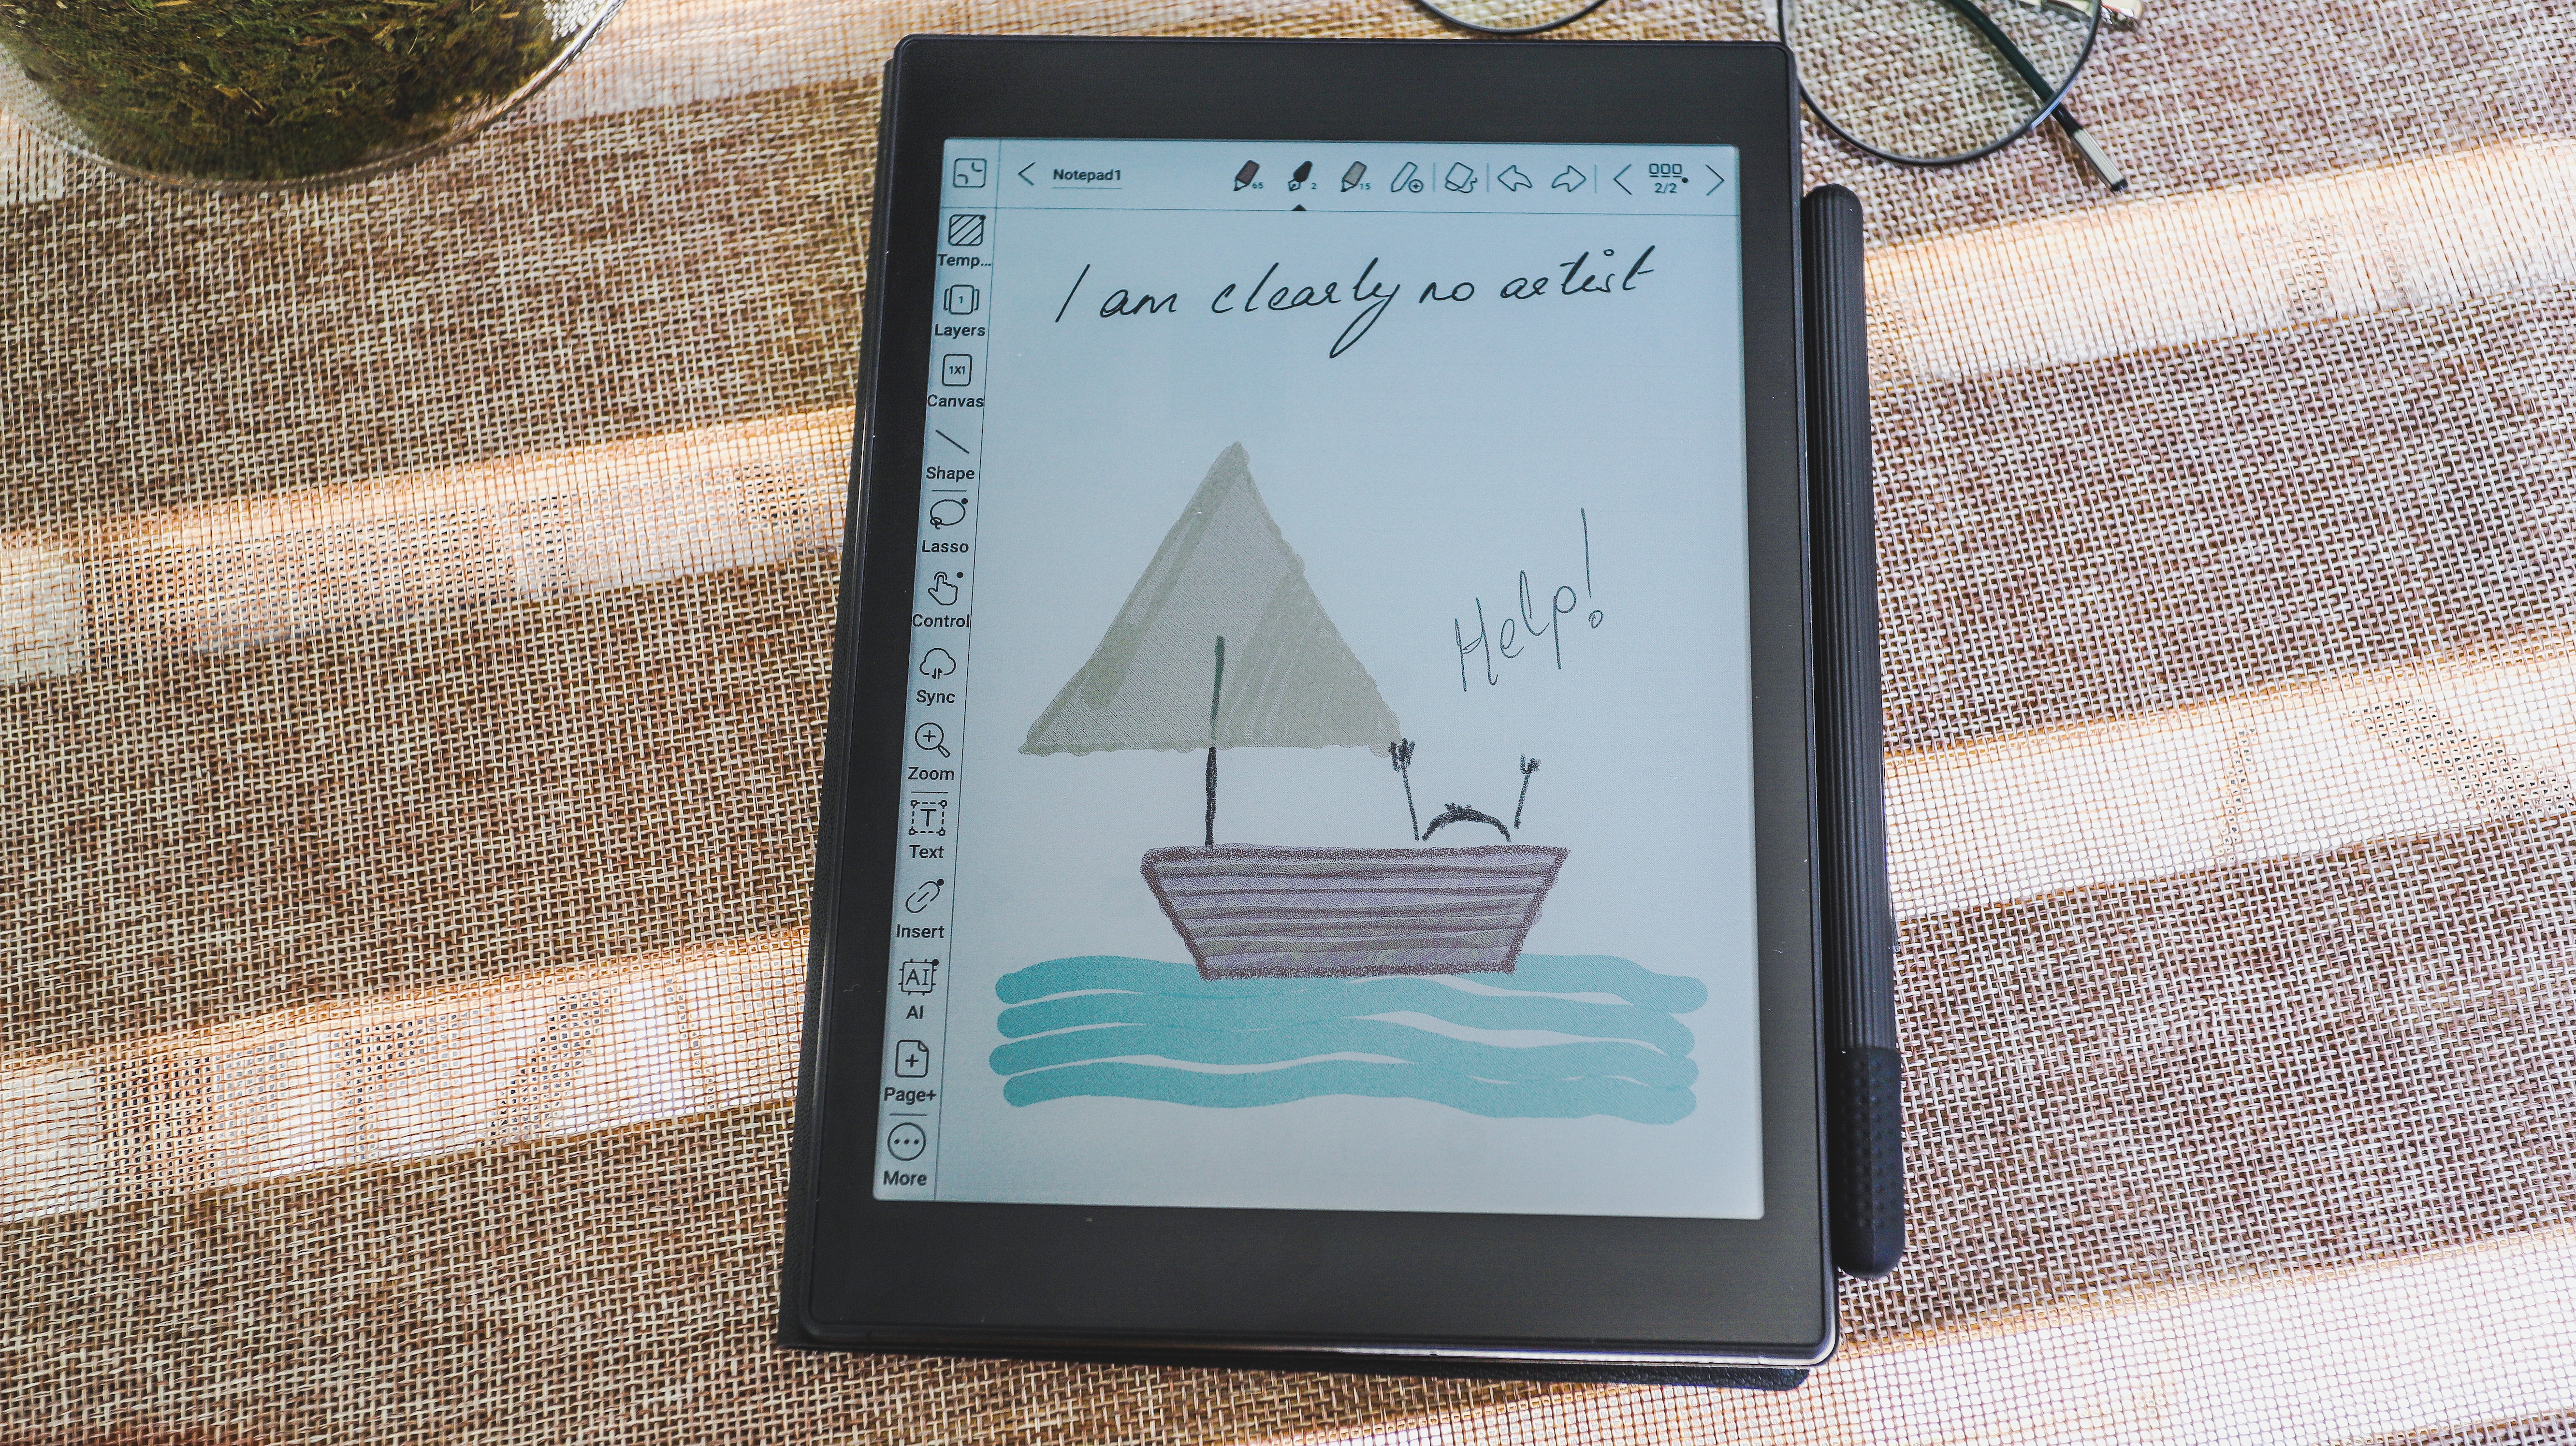 A crude color drawing of a boat on water on the Onyx Boox Tab Mini C ereader